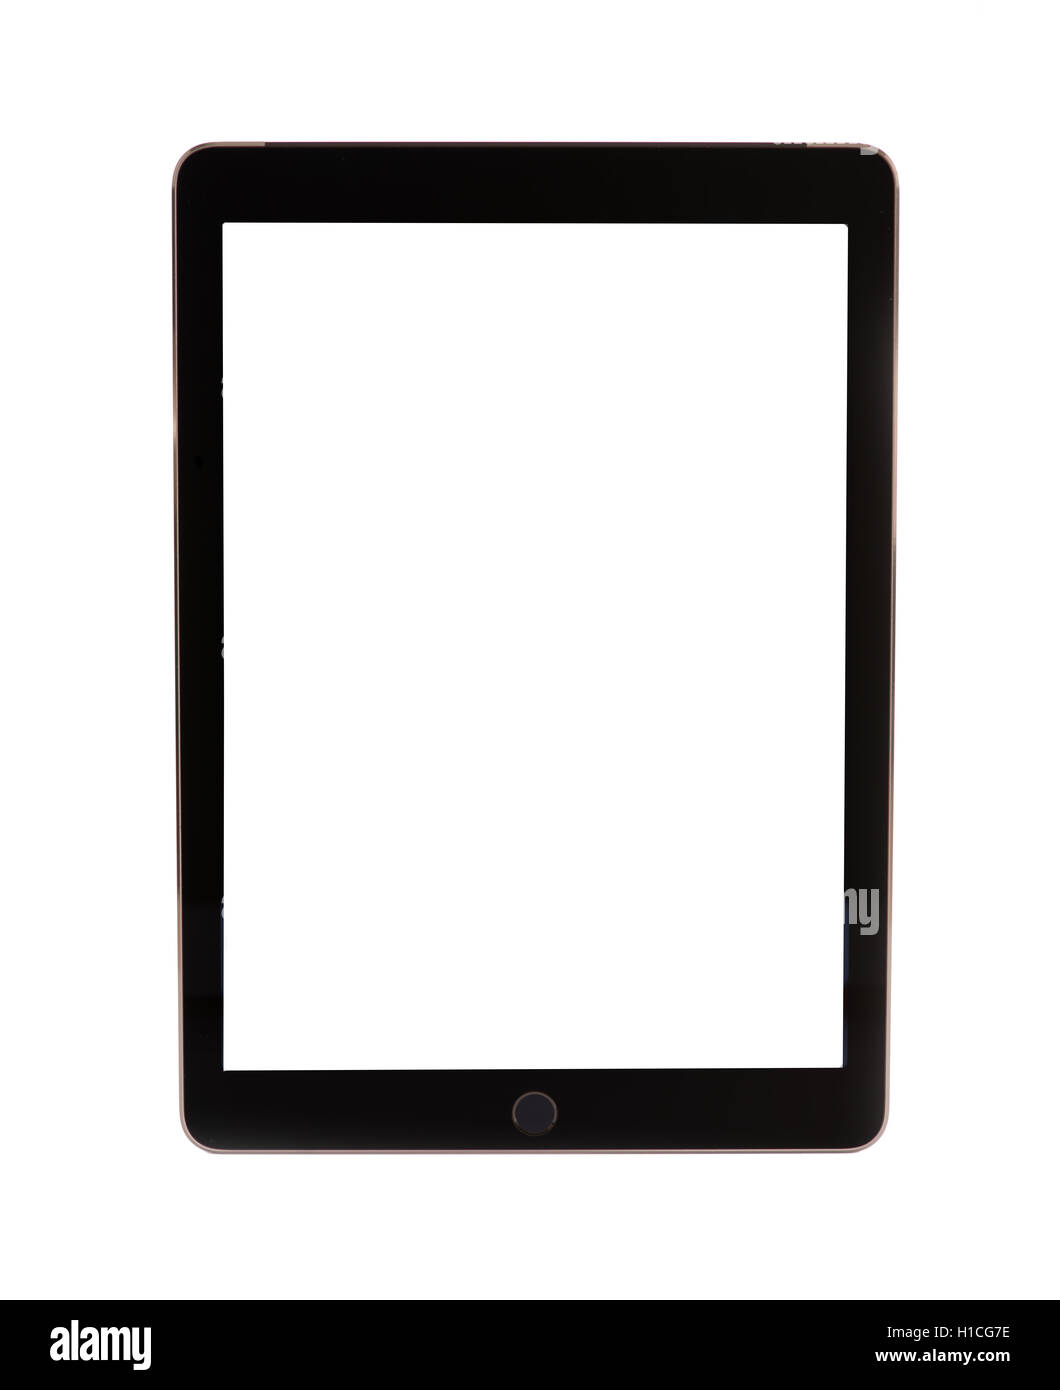 Black Business Tablet Similar To iPad Air Isolated Stock Photo